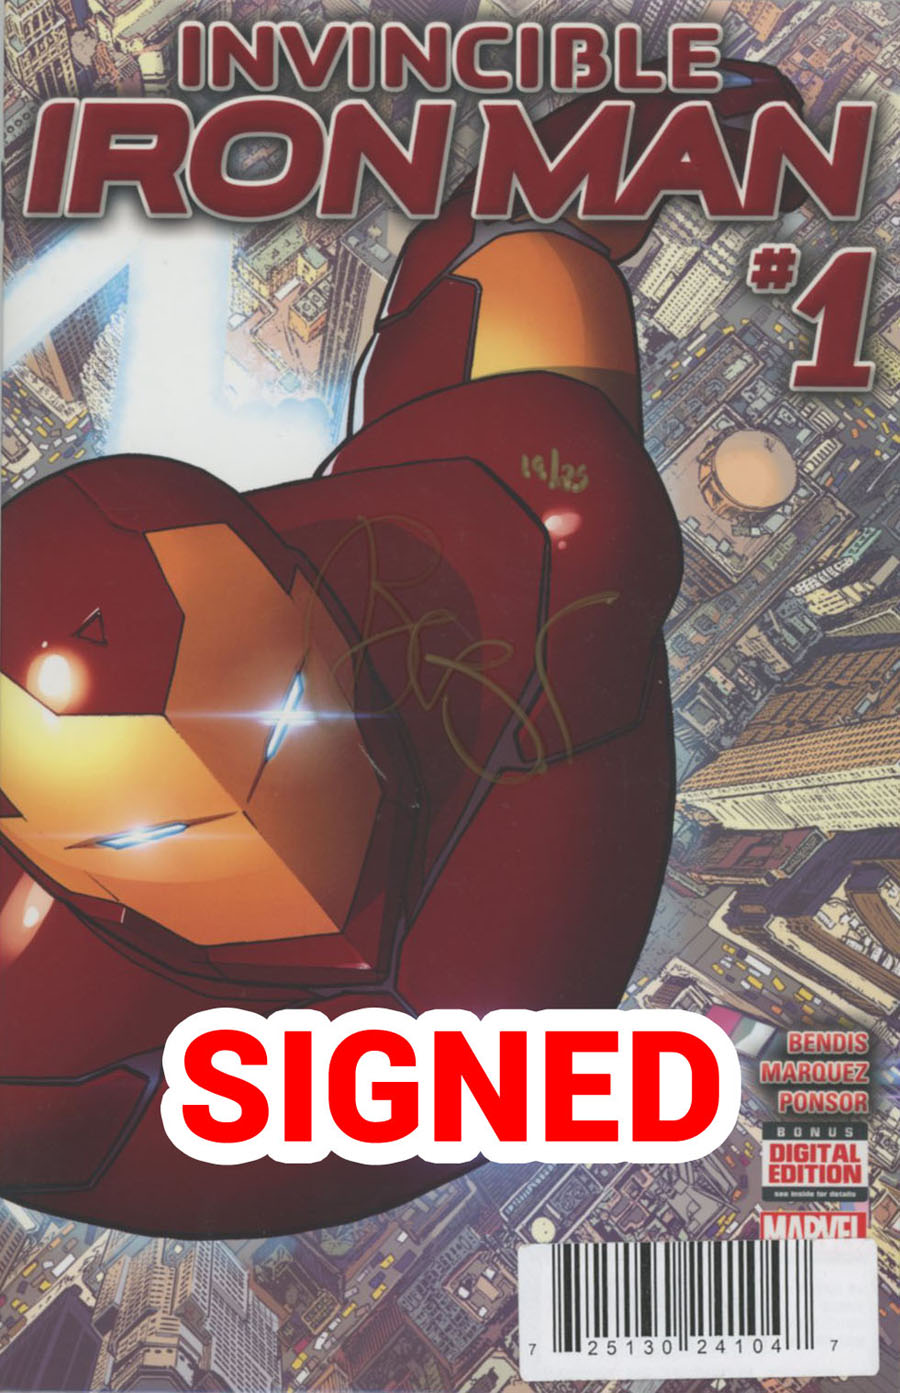 Invincible Iron Man Vol 2 #1 Cover U DF Golden Avenger Edition Signed By Brian Michael Bendis